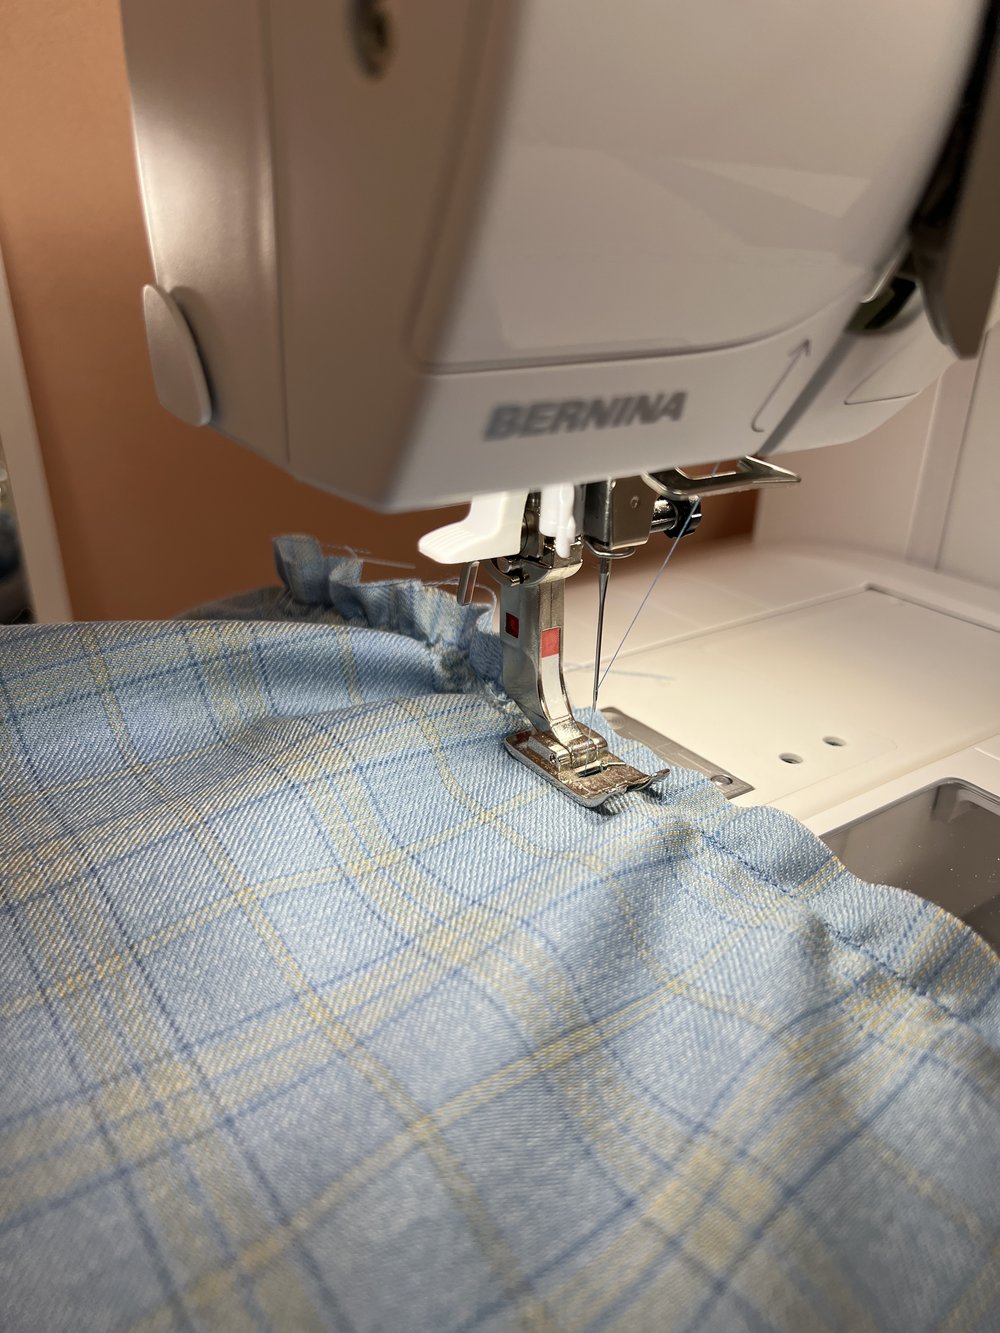 Begin sewing, providing stability to the material.